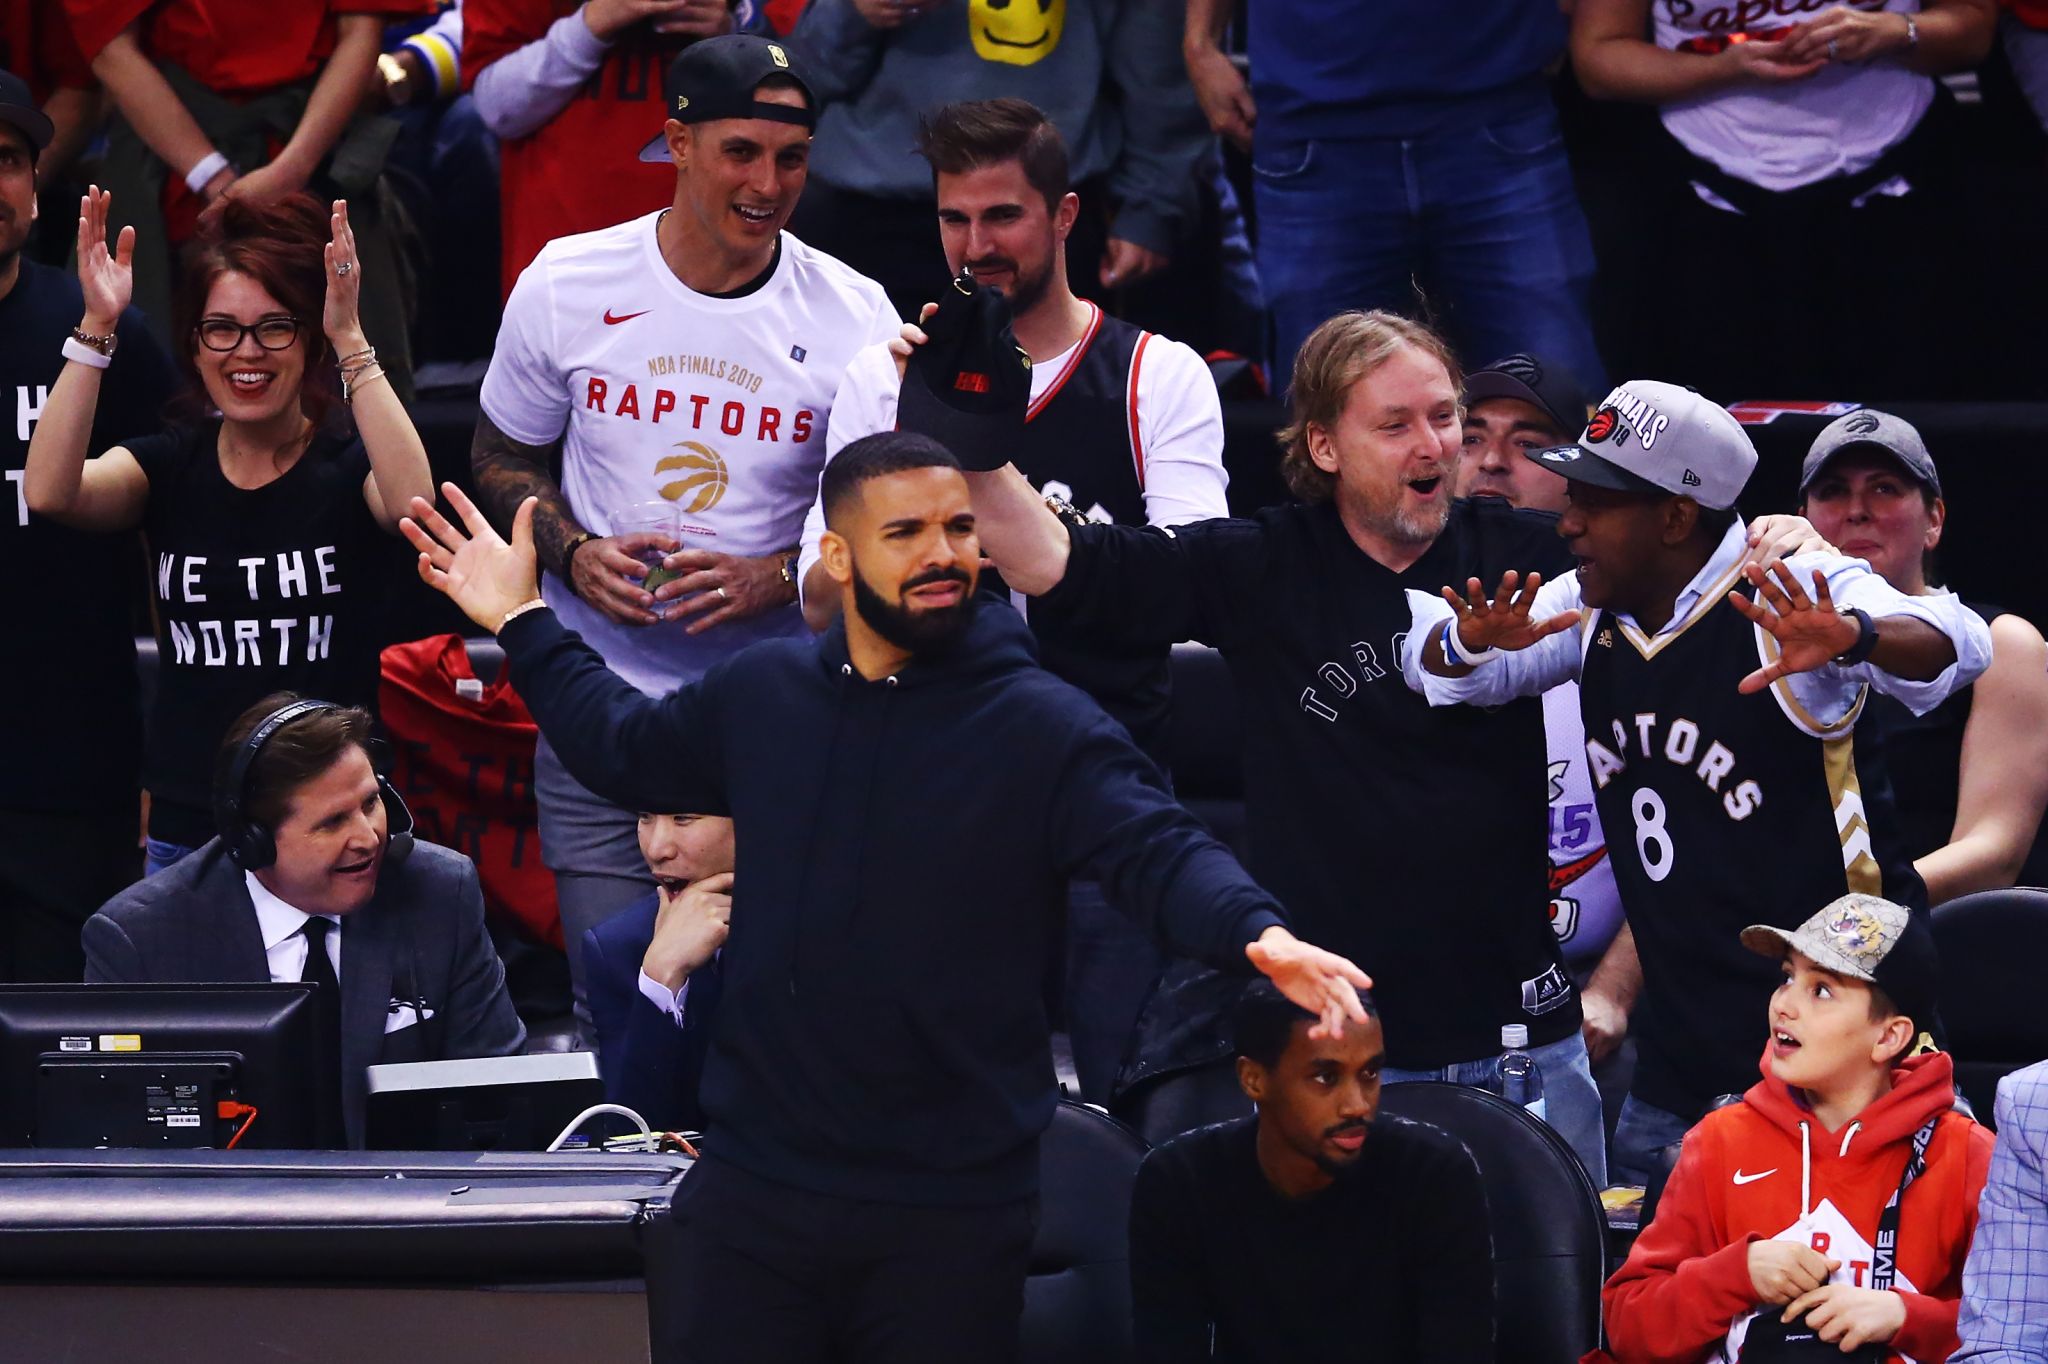 Dell Curry jersey got to Drake for Game 1 troll after seller drove 10 hours